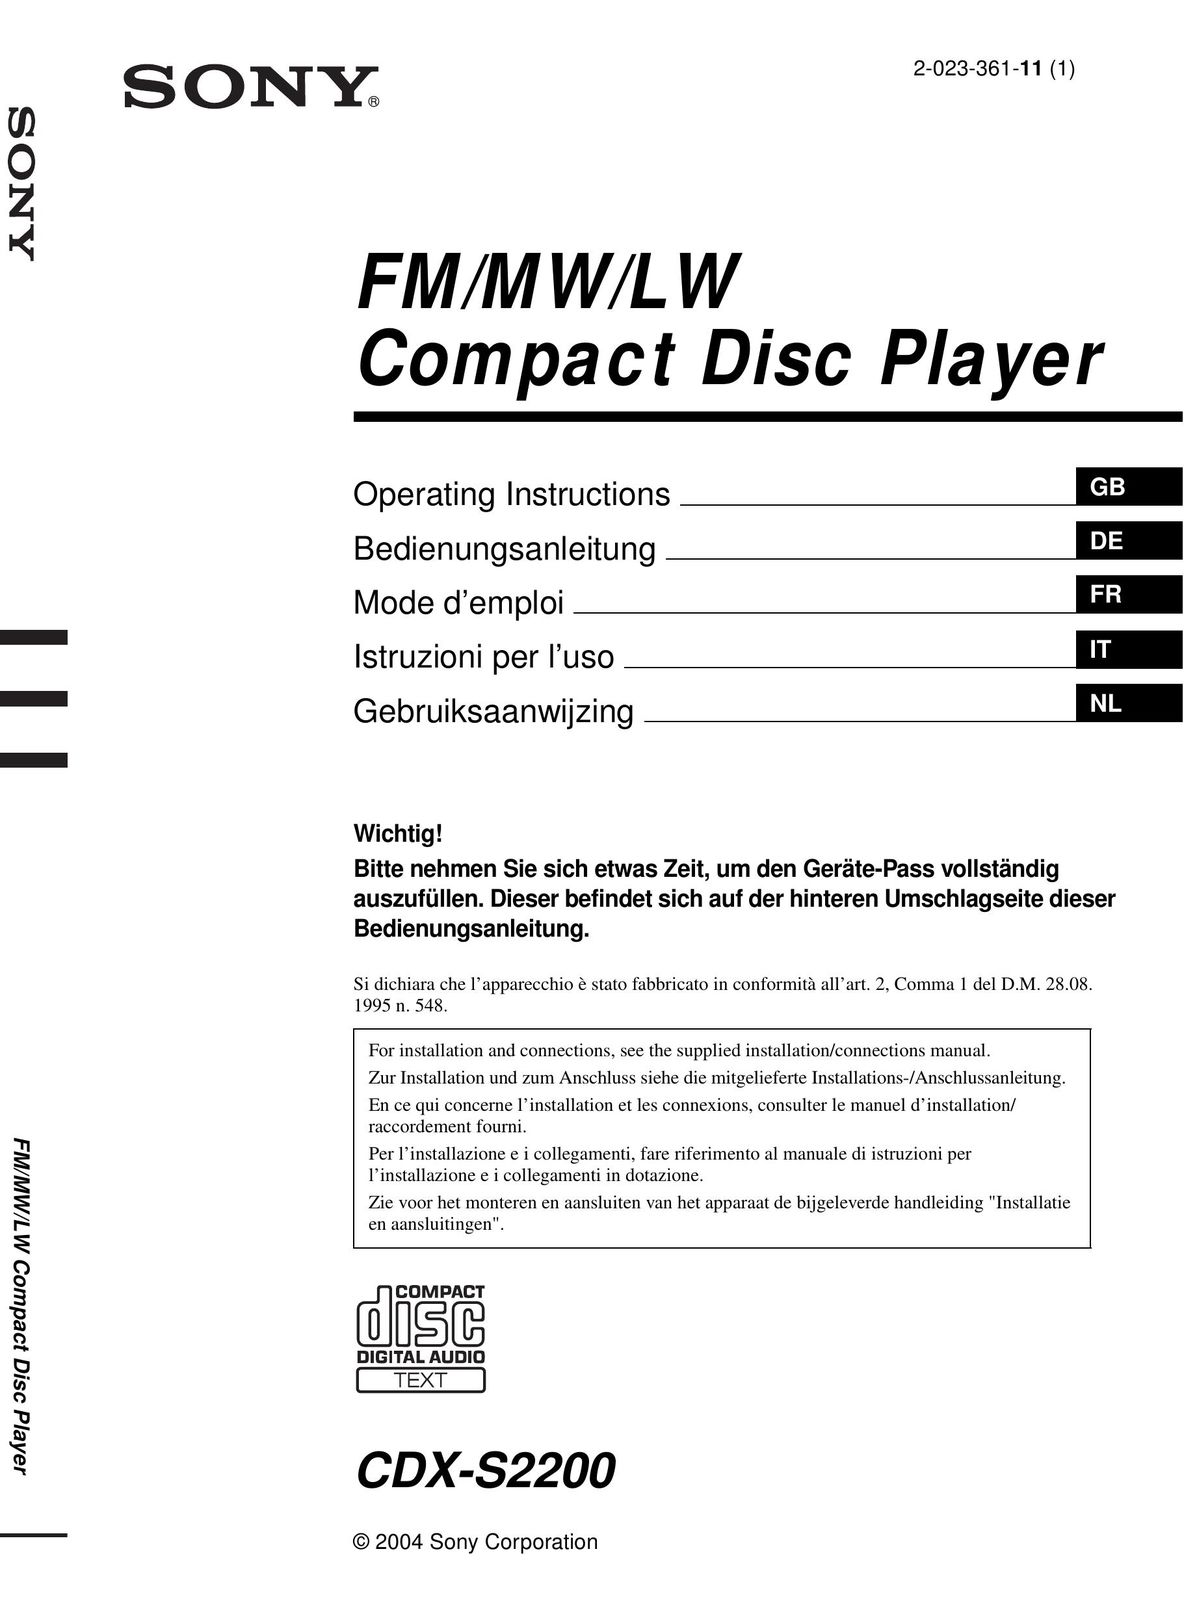 Sony CDX-S2200 Portable CD Player User Manual